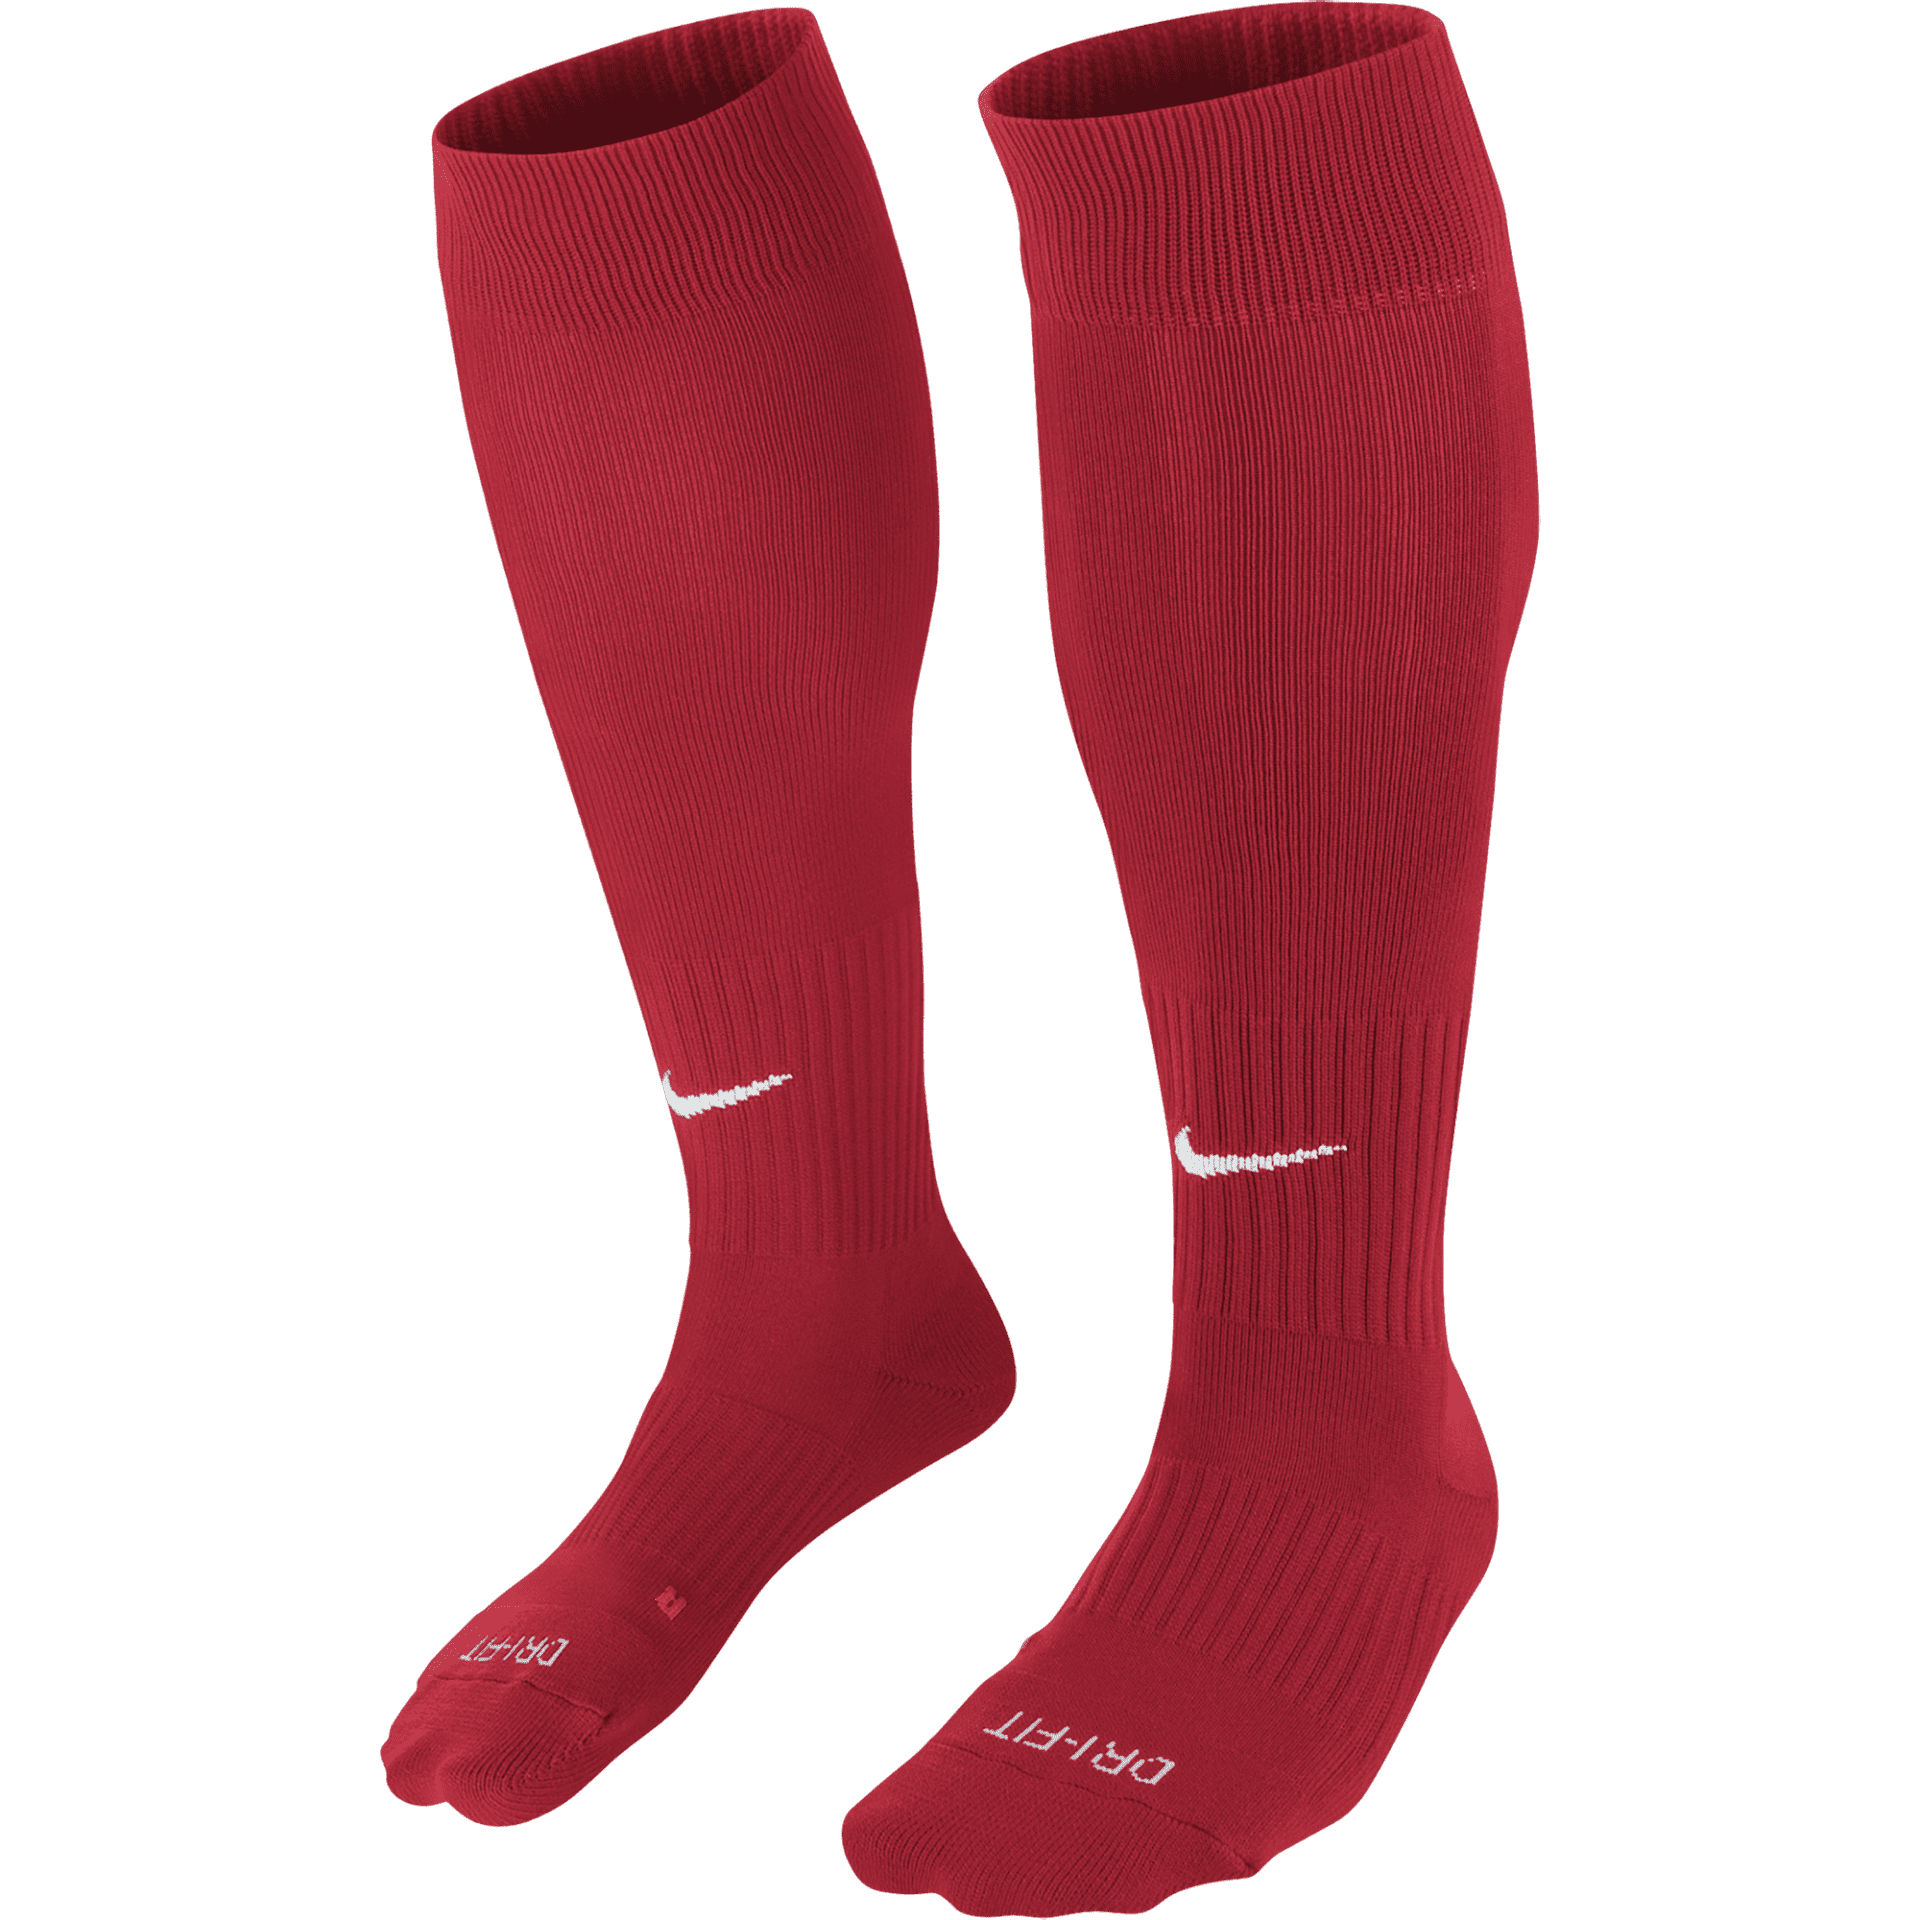 dundrum classic socks red 34153 p